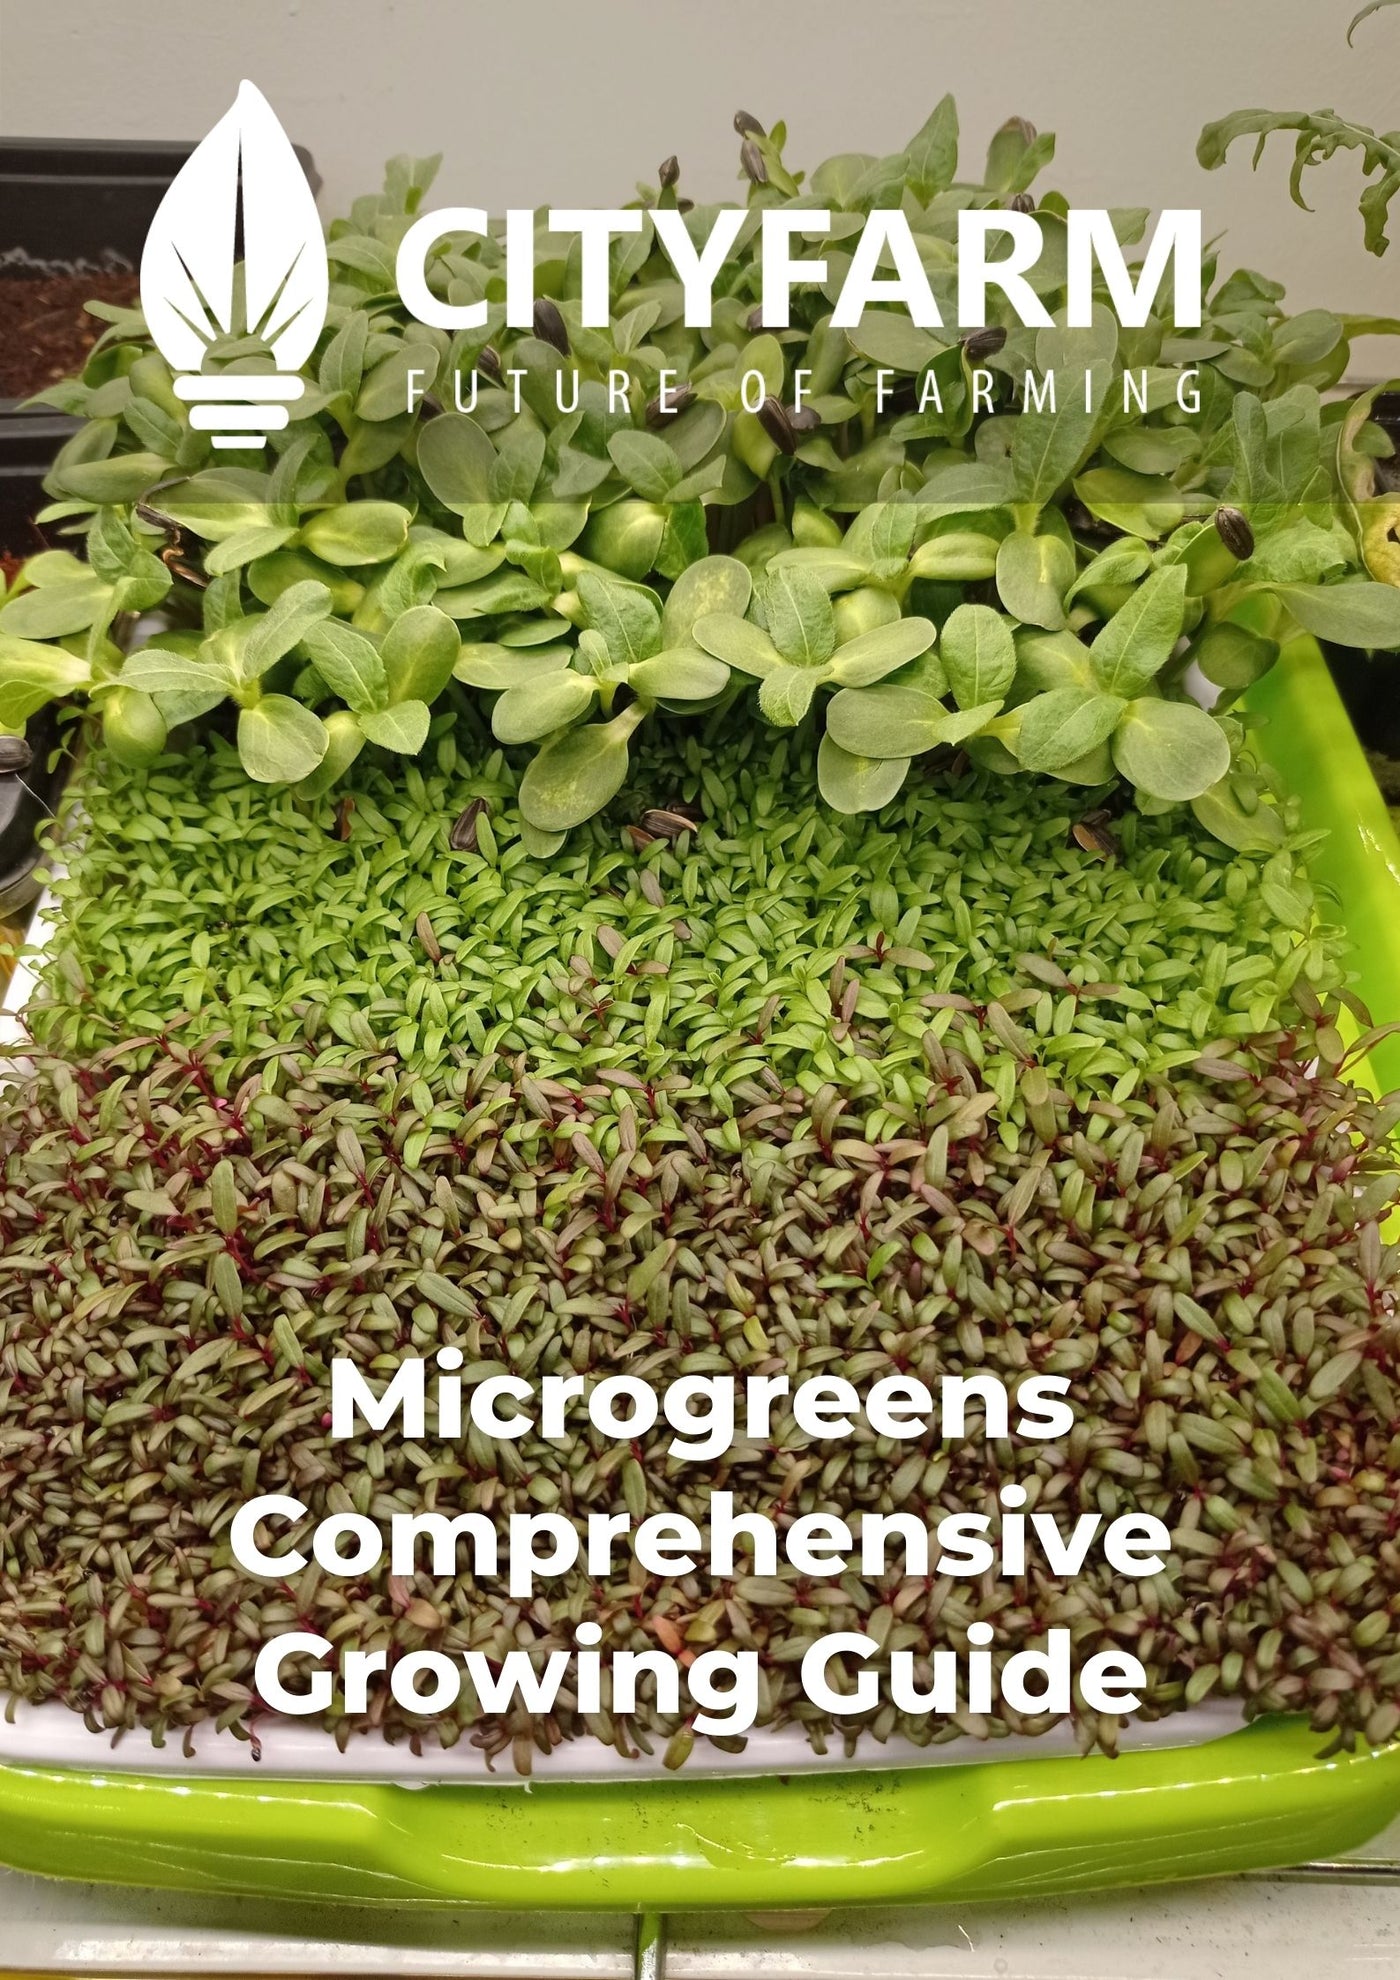 [Guide] Microgreens Comprehensive Growing Guide